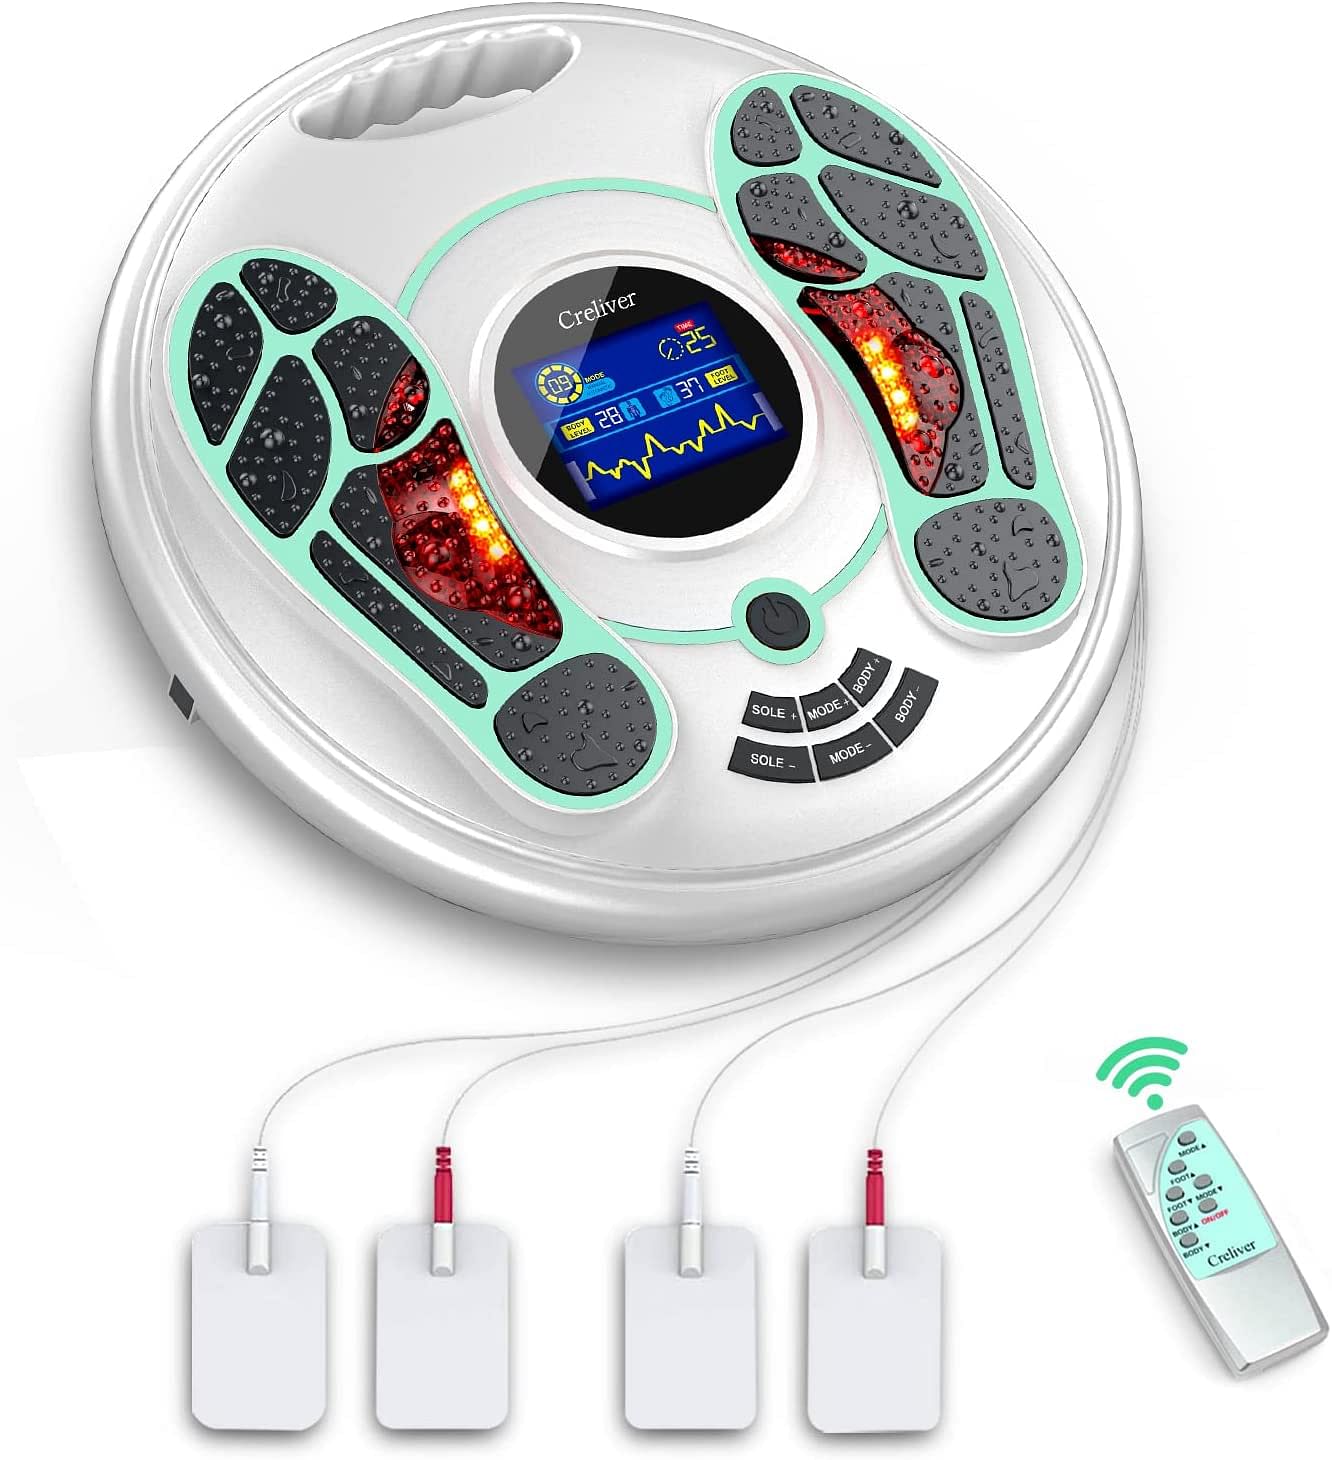 Getfitpro EMS & TENS Foot Stimulator Massager-FSA or HSA Eligible-Electric Foot Stimulator with Remote Control Improves Circulation, Feet Legs Nerve Muscle Stimulator Relieves Body Pains, Neuropathy